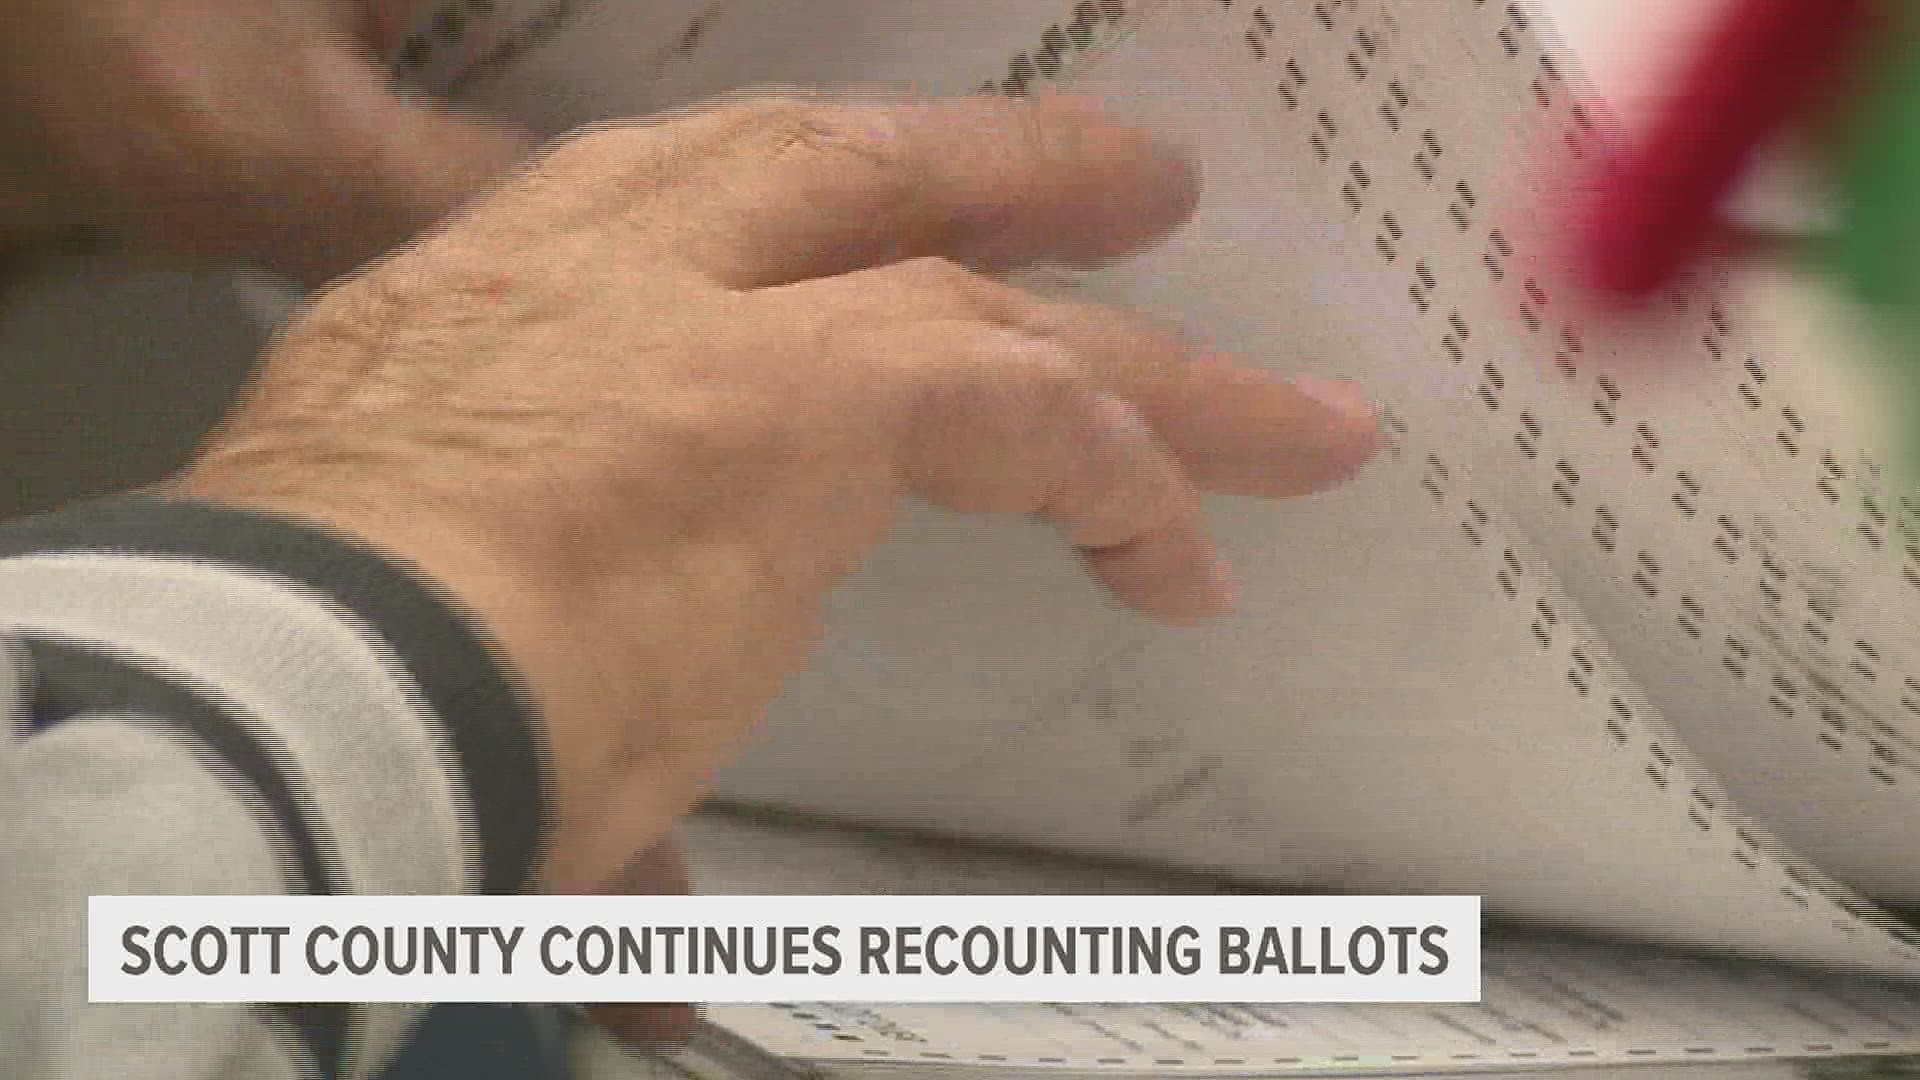 After its third recount, Scott County says it is done counting ballots